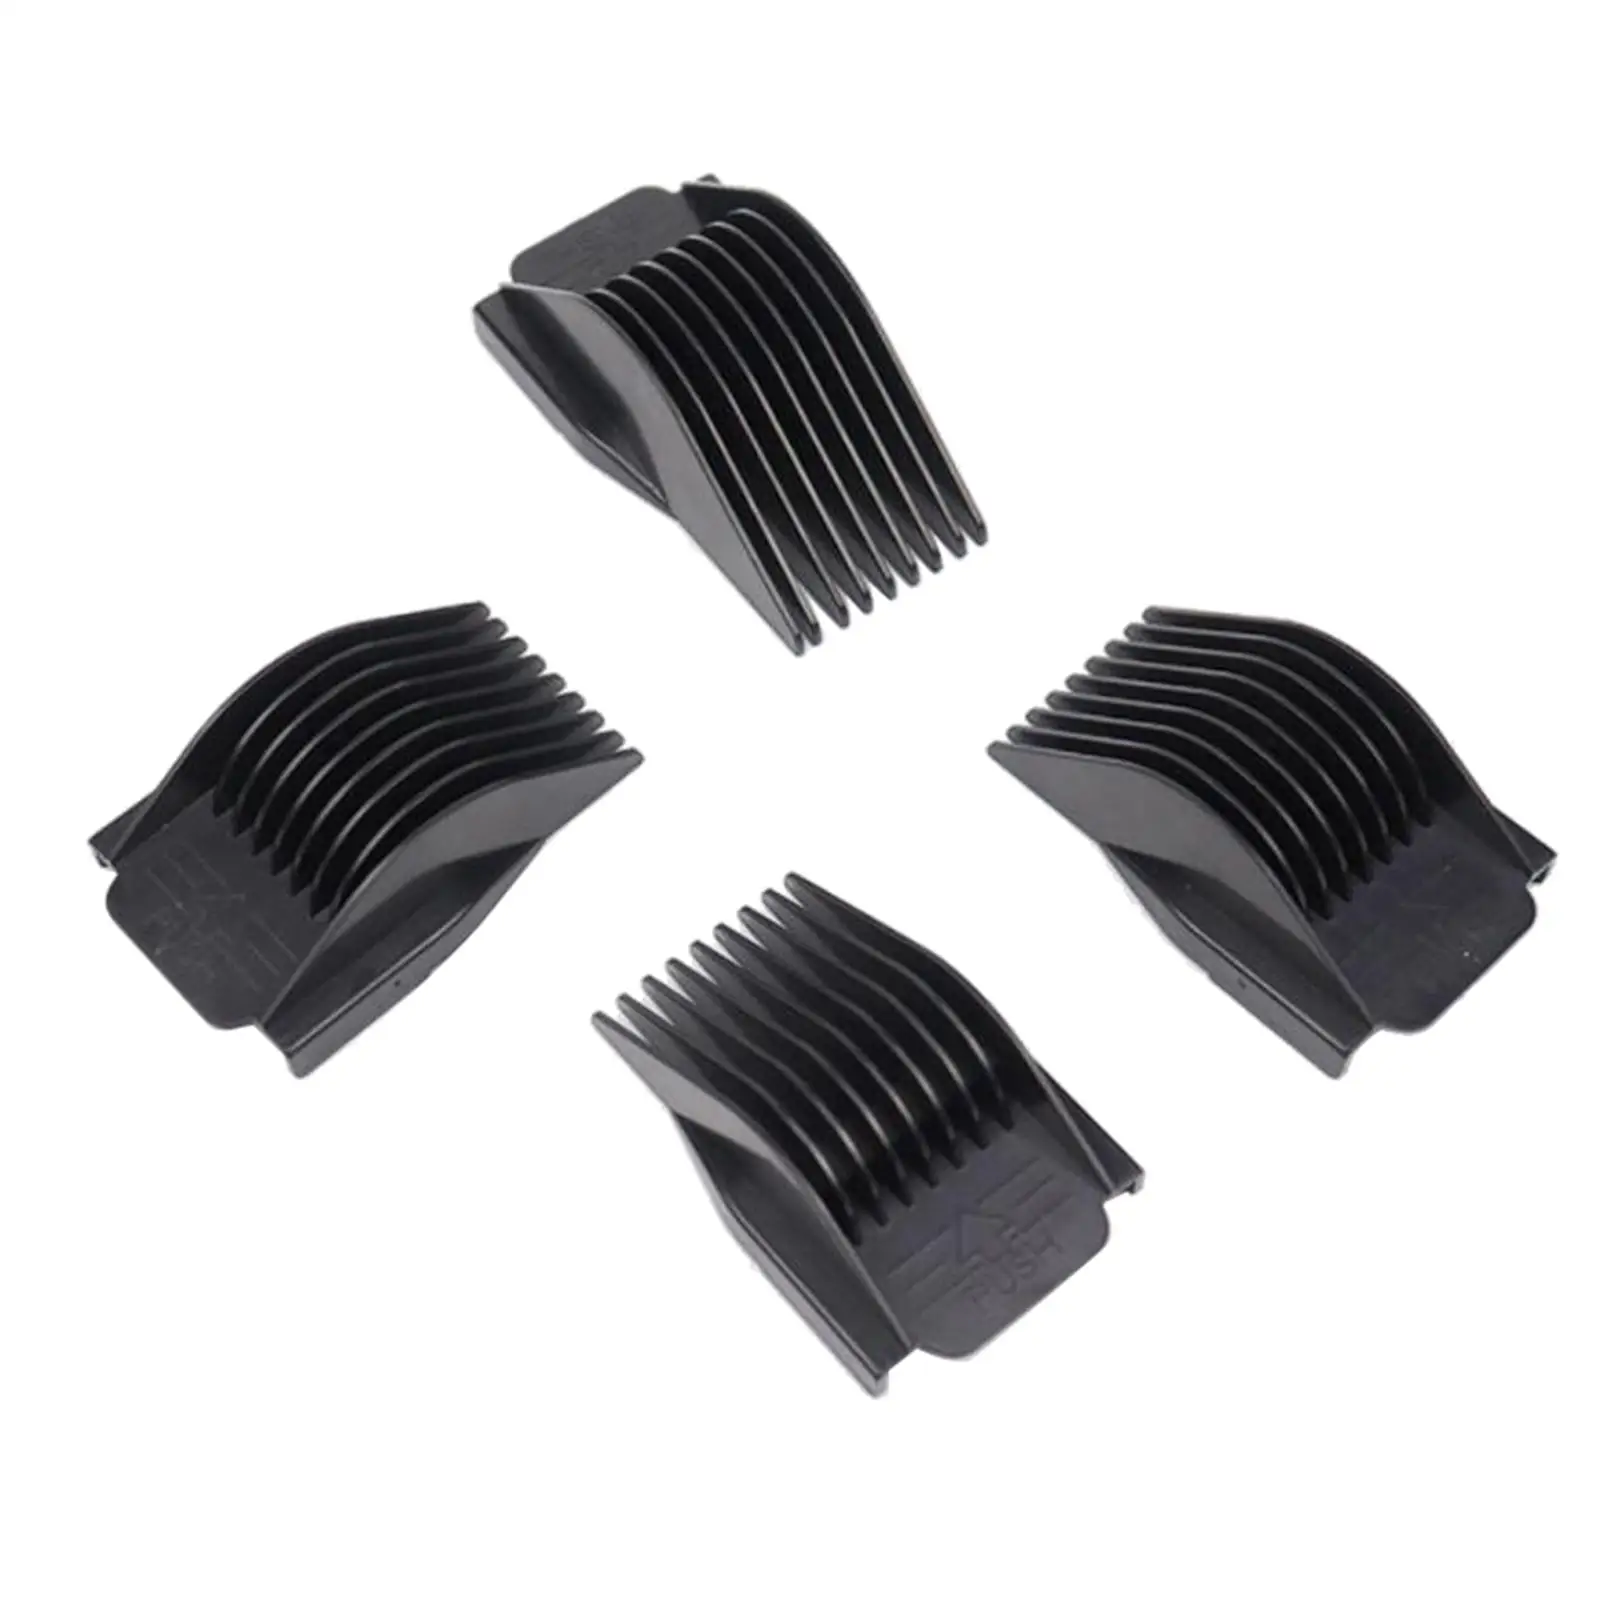 4Pcs Hair Trimmer Clipper Guards Guide Combs for Attachment Most Size Hair Clippers/Trimmers